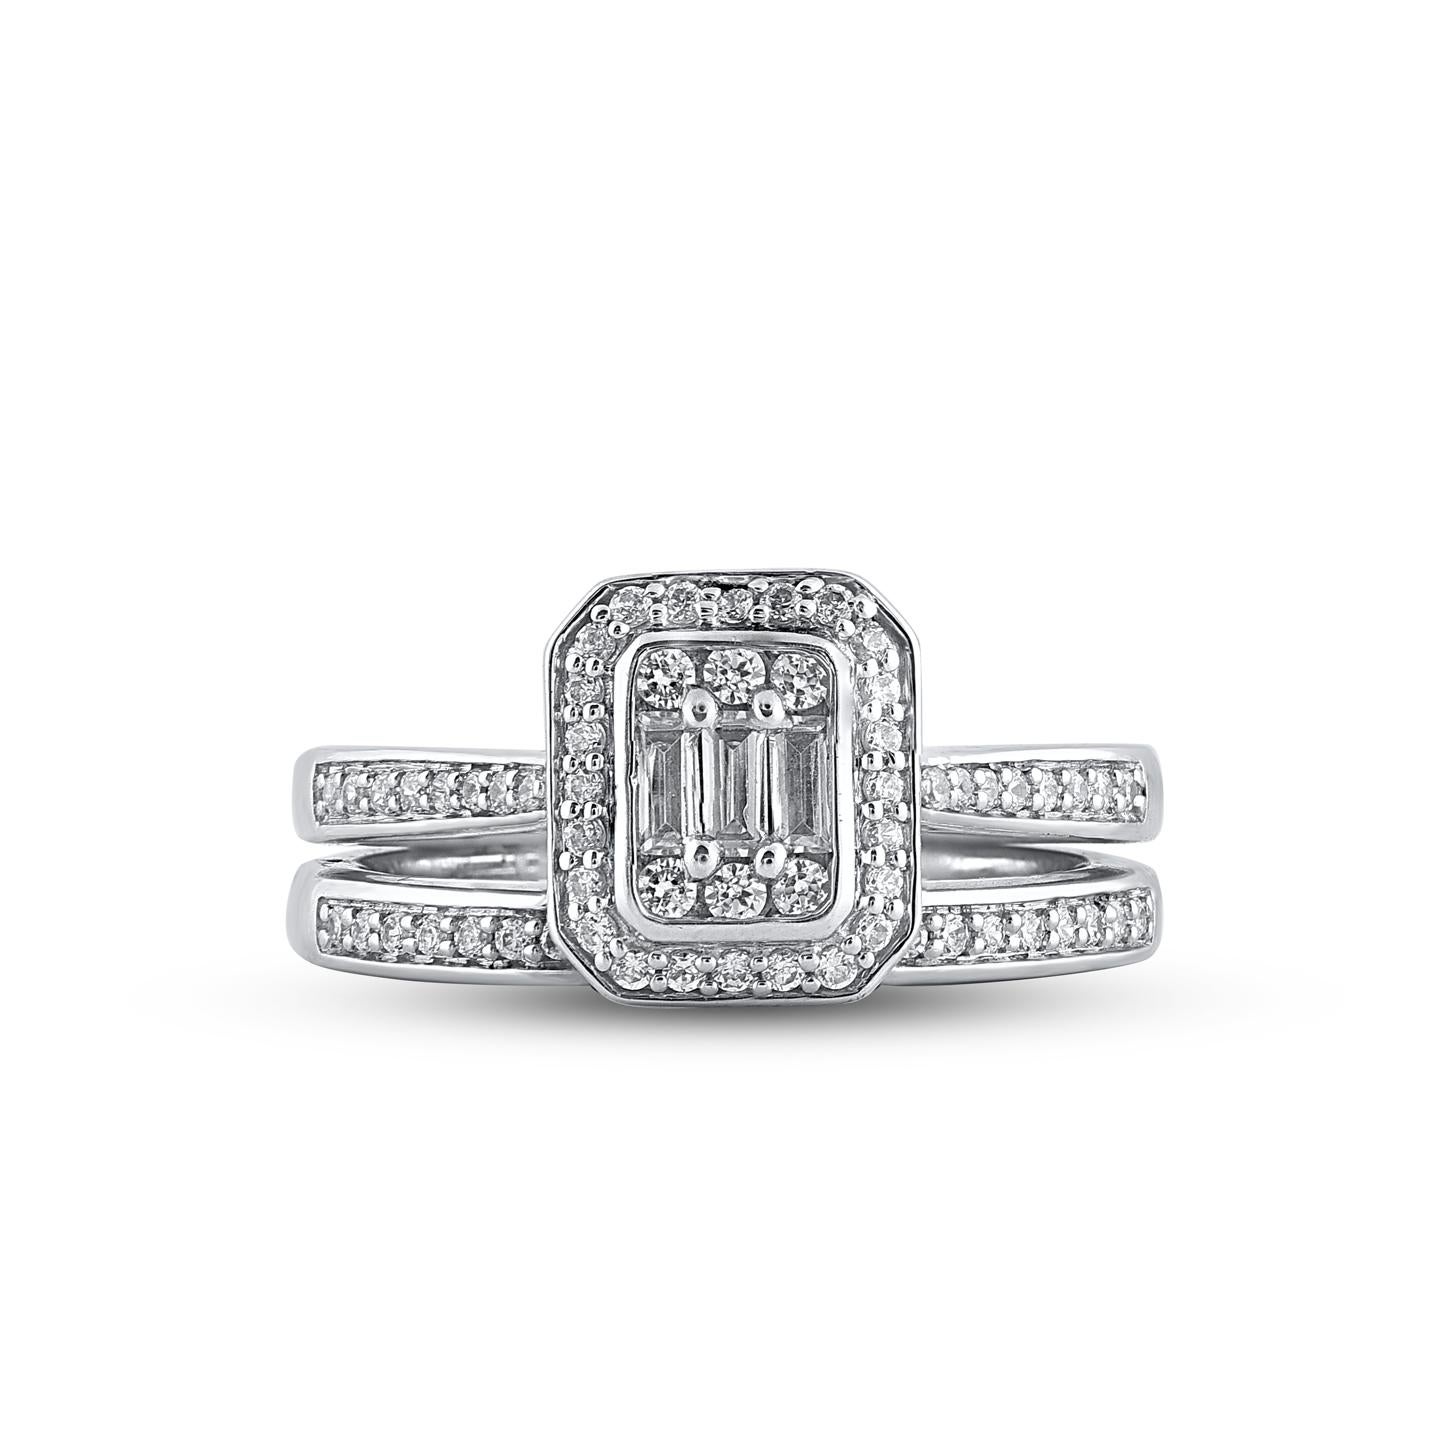 Express your love for her in the most classic way with this diamond ring set. Crafted in 14 Karat white gold. This wedding ring features a sparkling 70 brilliant cut, single cut round diamonds and baguette cut diamonds beautifully set in prong &